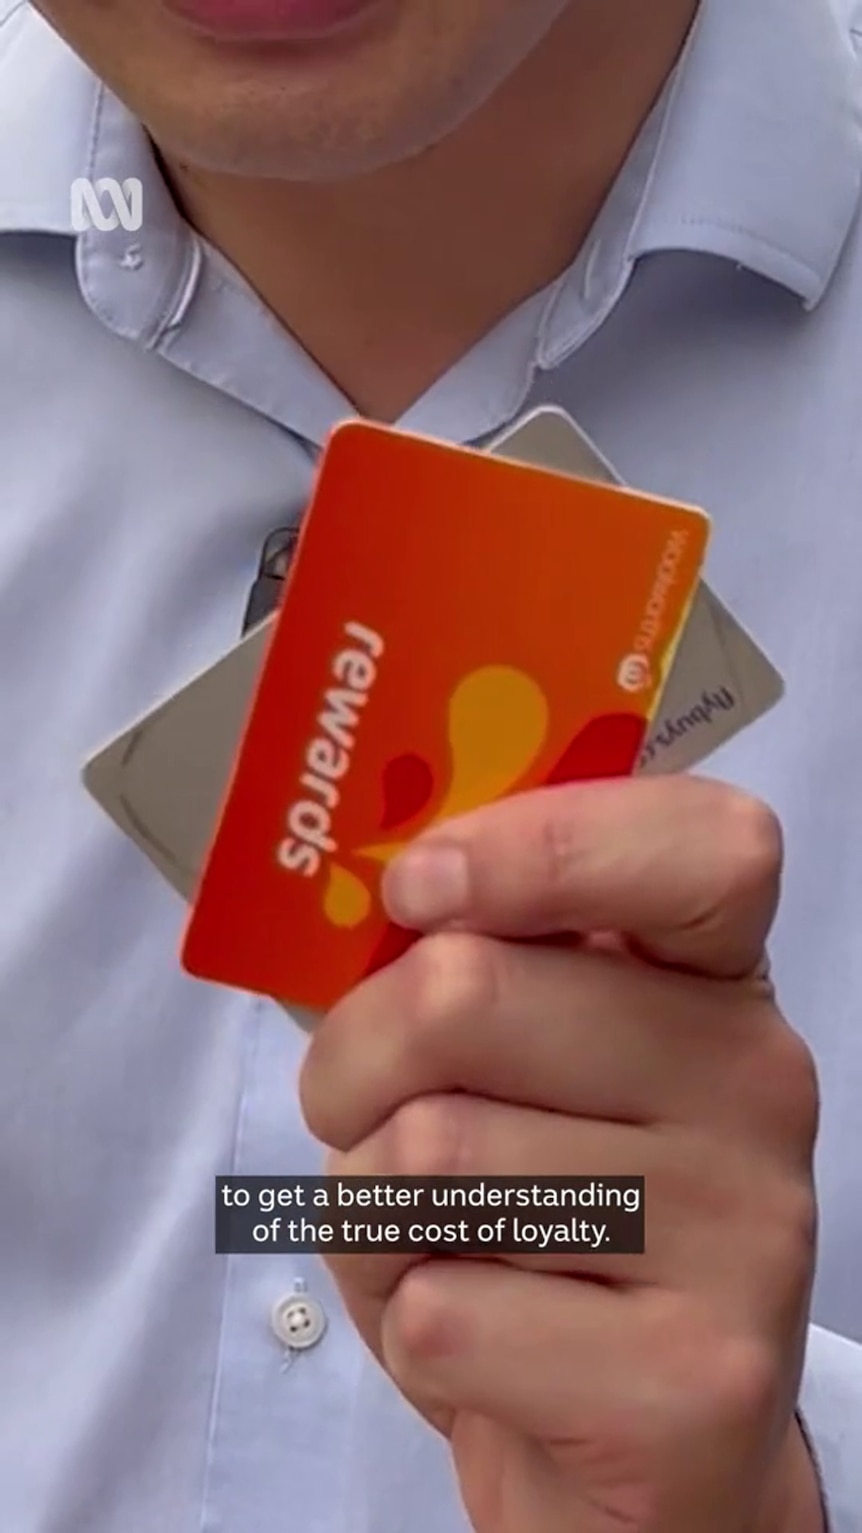 A man's hand holds up supermarket loyalty cards to the camera, his shaven chin and blue shirt are visible in the background